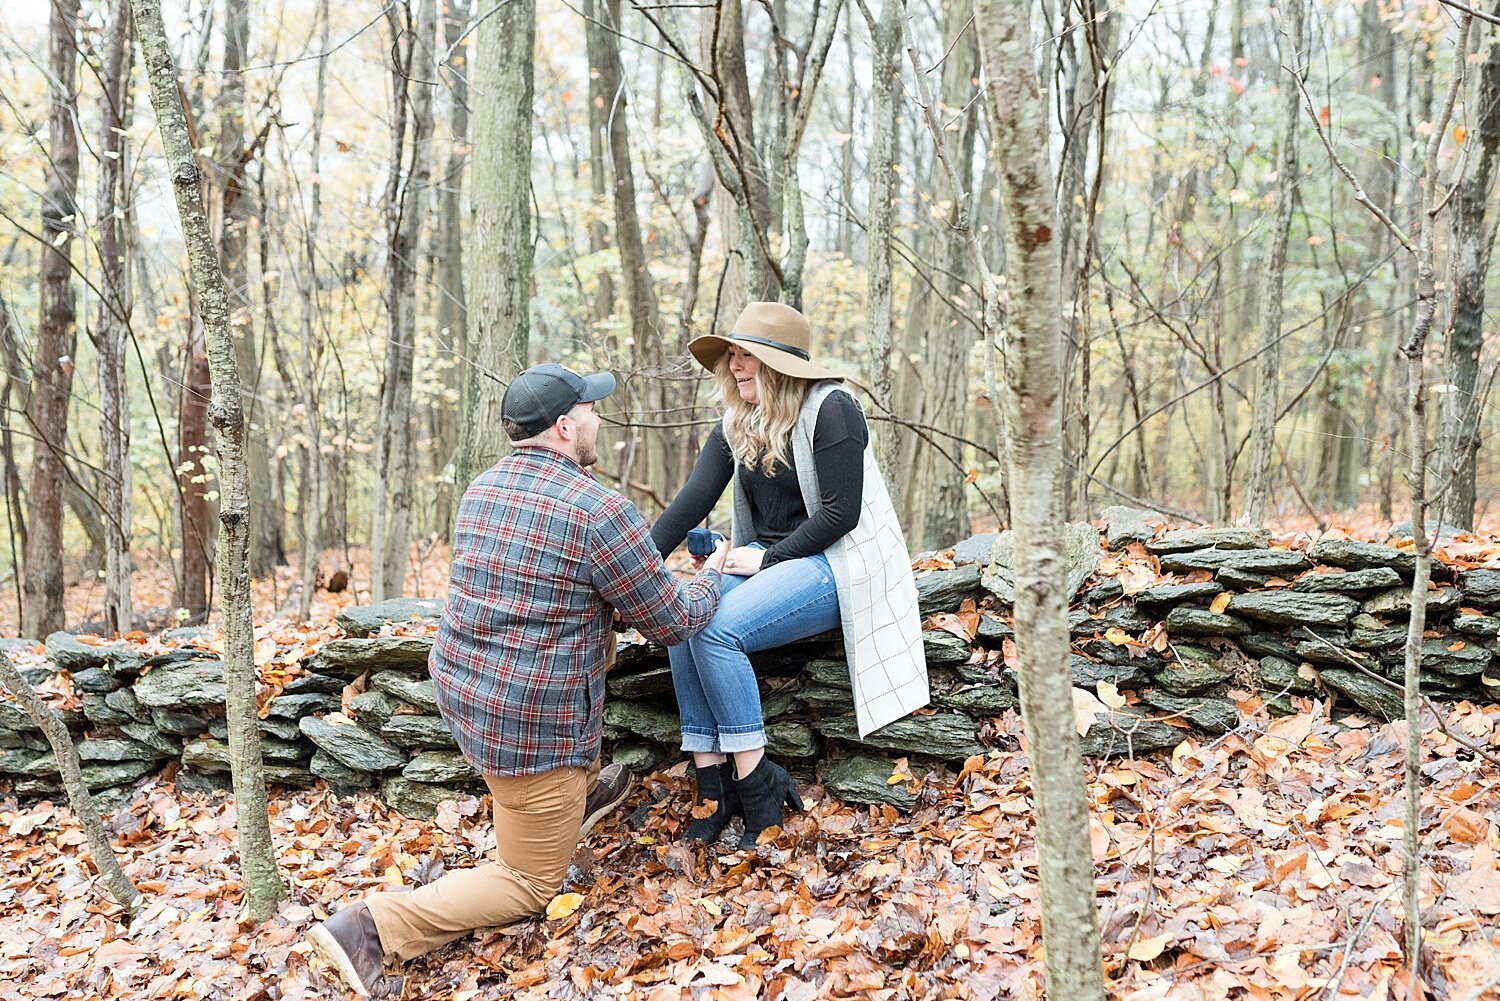 Pinnacle Overlook Holtwood PA Surprise Proposal Photography_8718.jpg